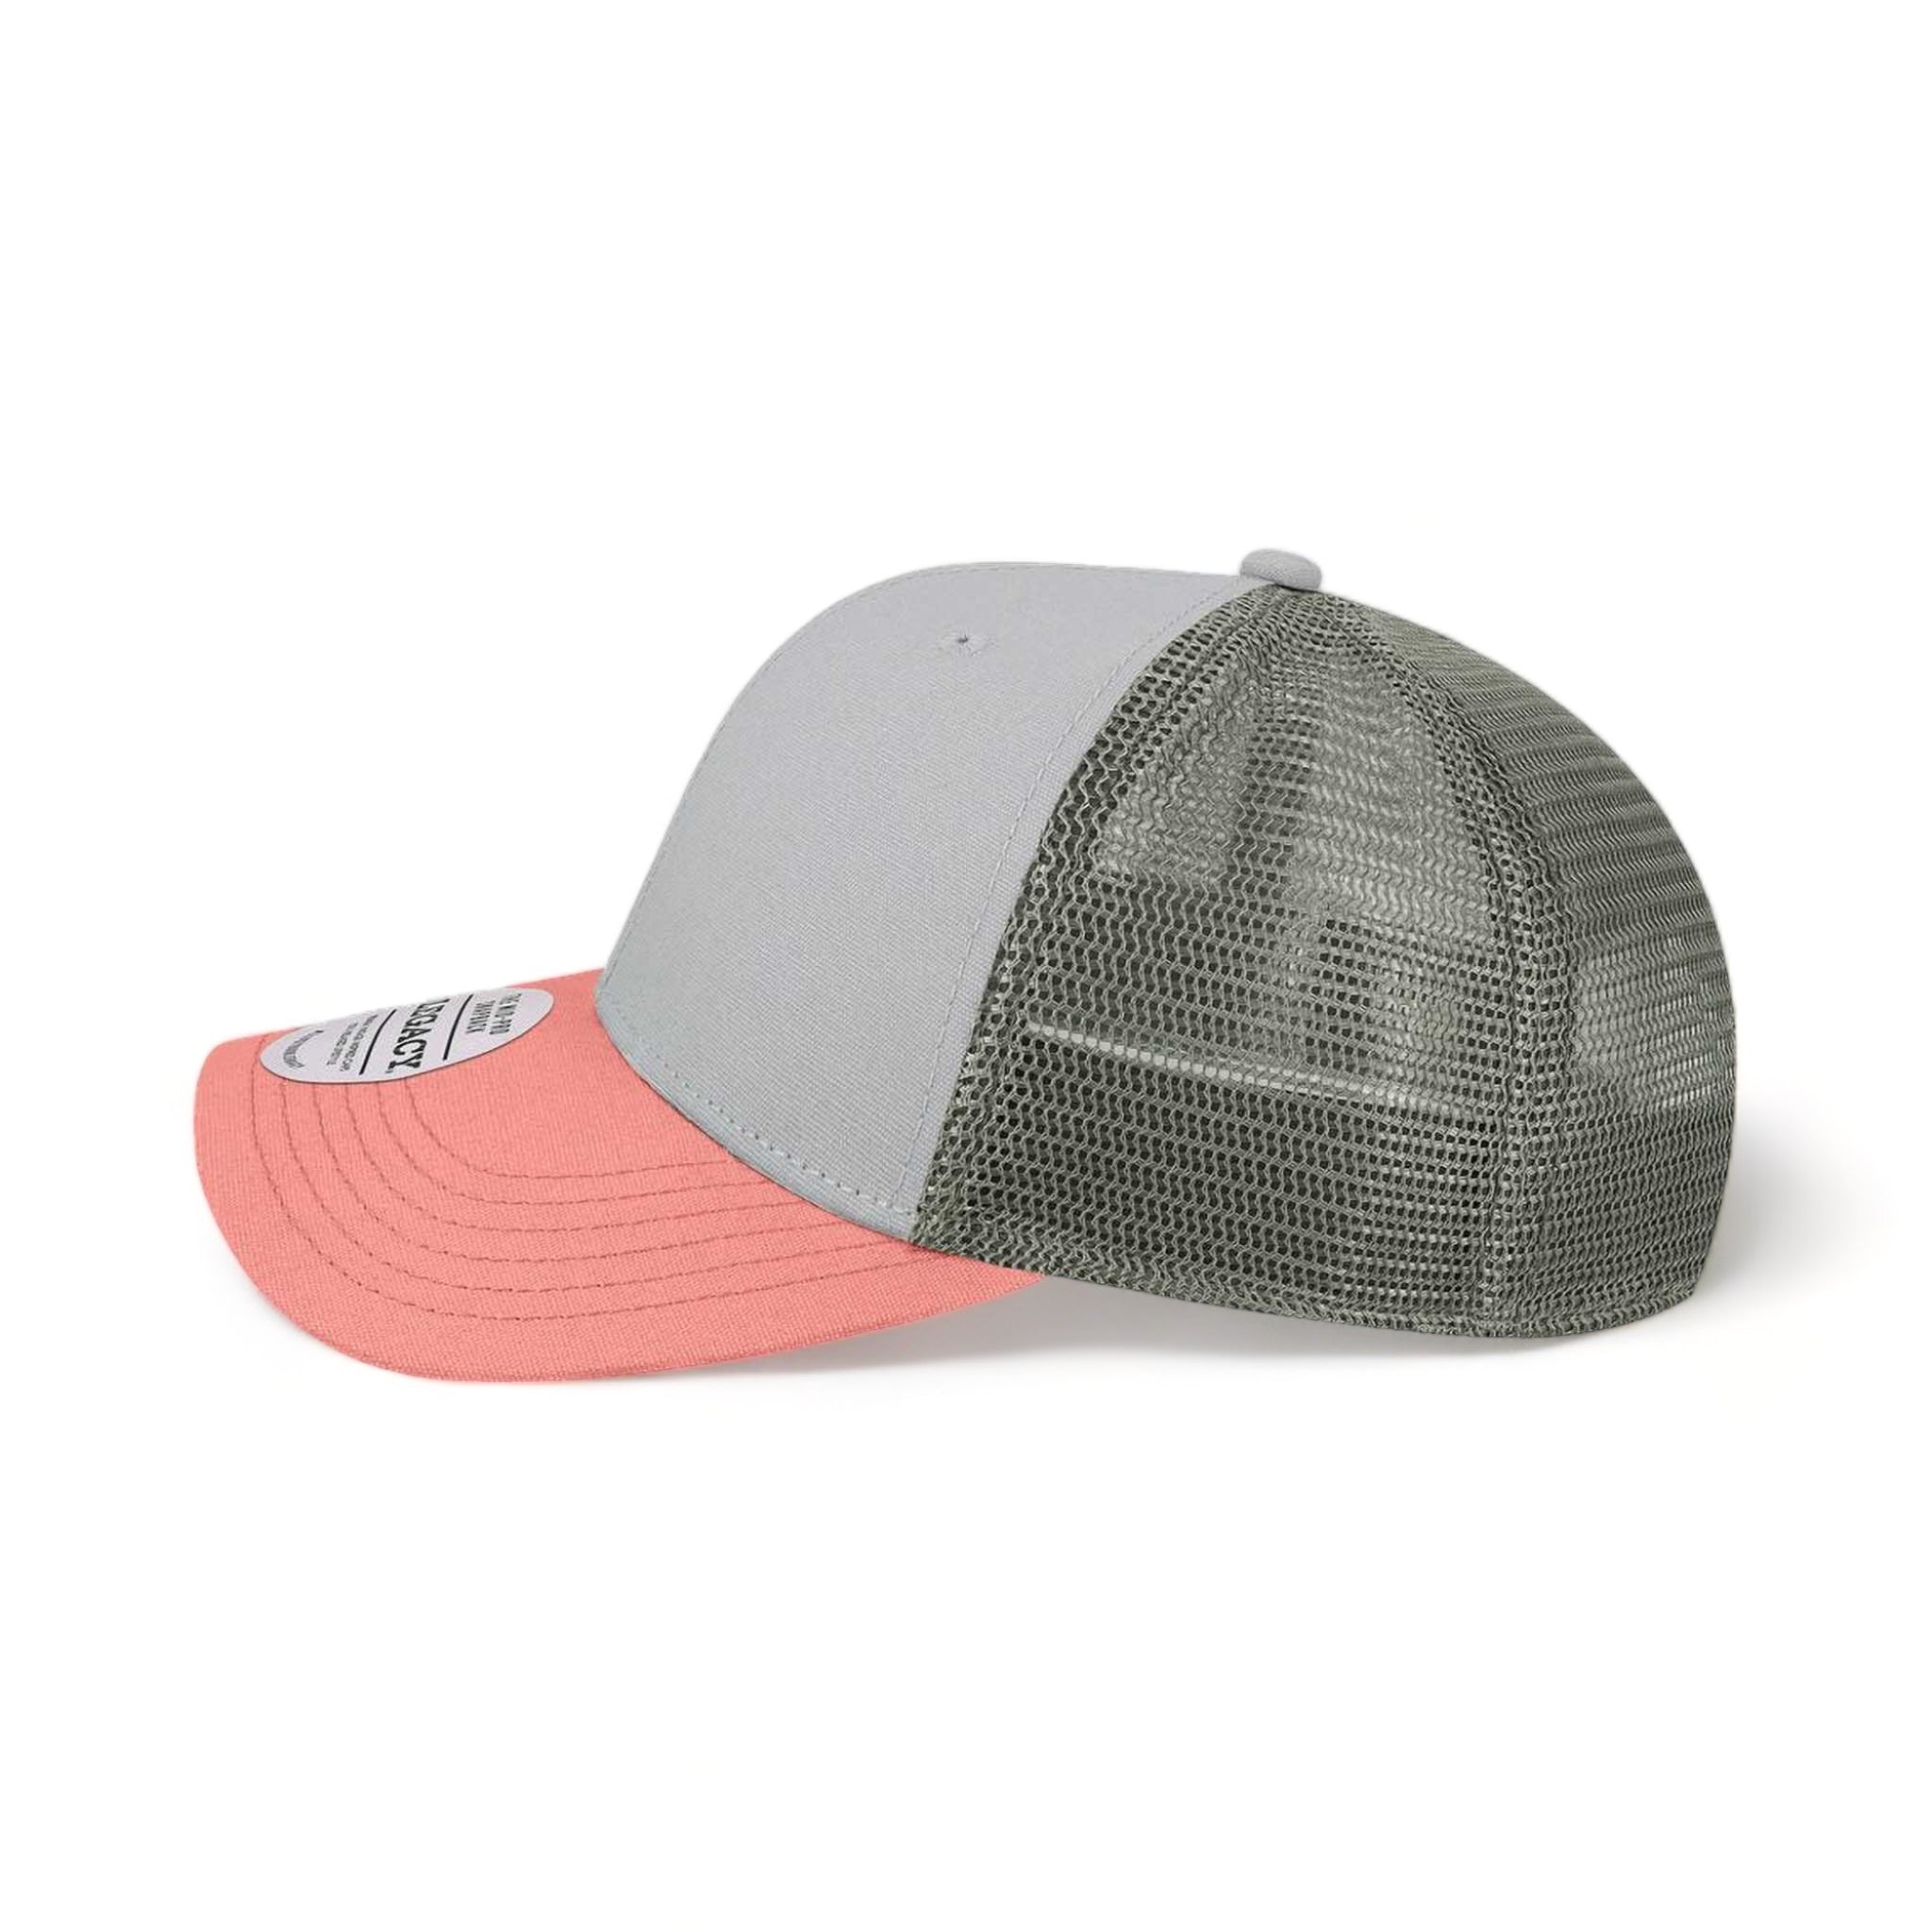 Side view of LEGACY MPS custom hat in light grey, salmon and dark grey